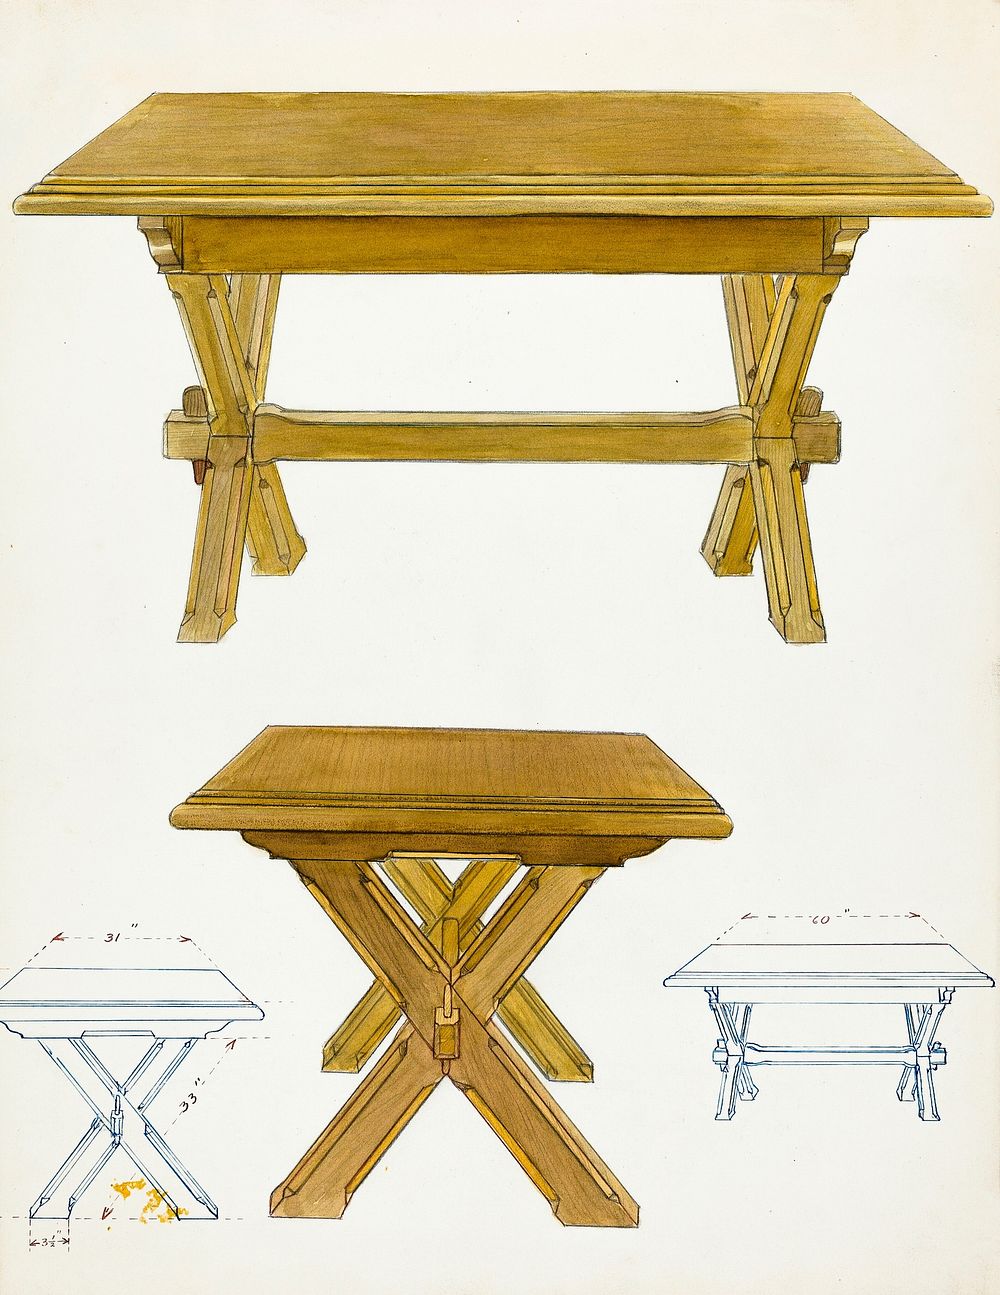 Pa. German Trestle Table (c. 1936) by Lawrence Porth. Original from The National Gallery of Art. Digitally enhanced by…